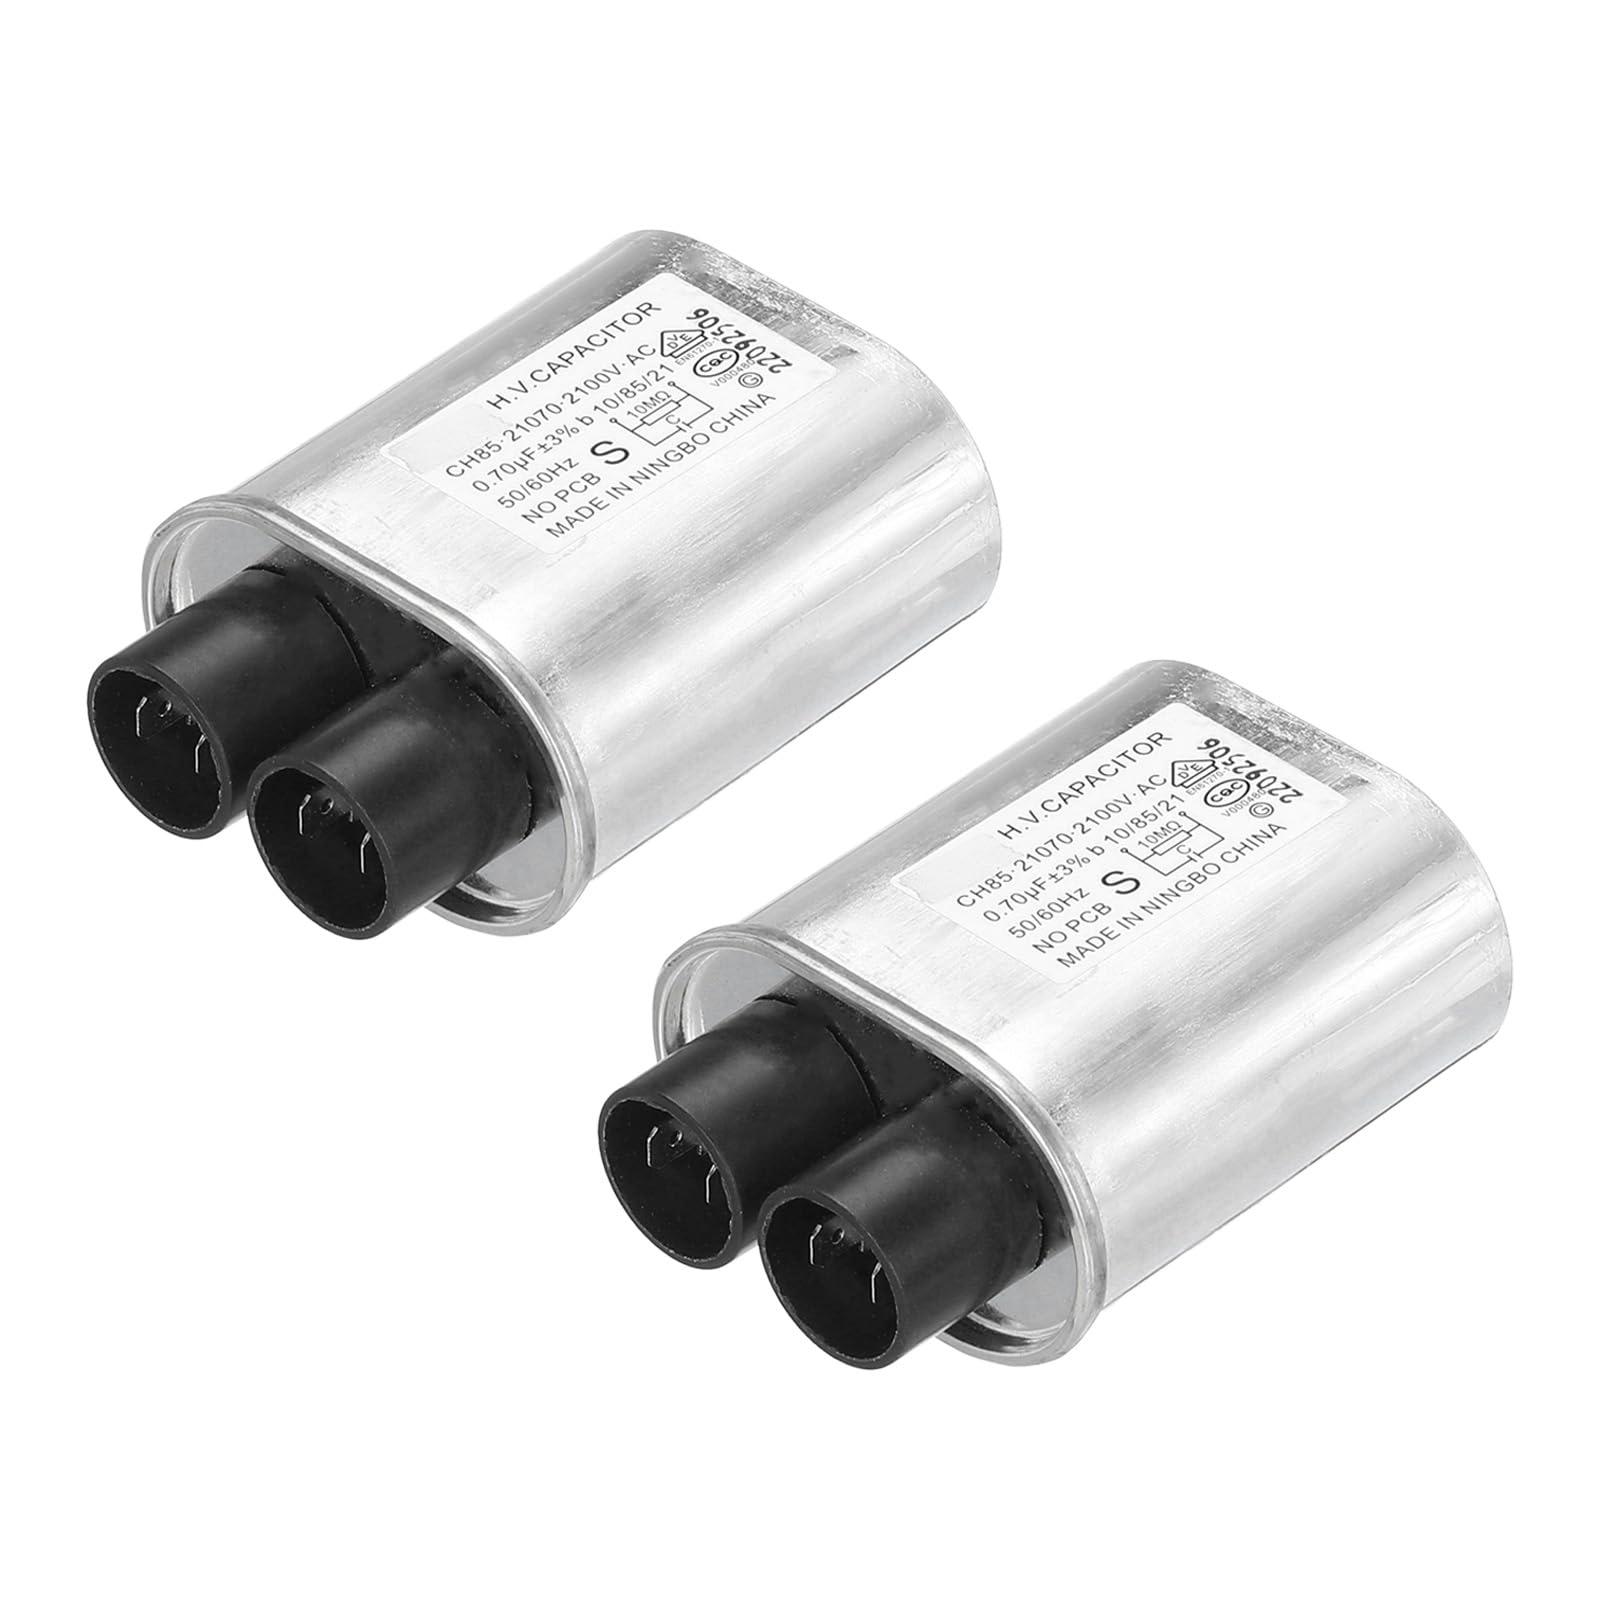 sourcing map Microwave Capacitor Replacement High Voltage Oven Capacitor 2100VAC 0.70uf Pack of 2